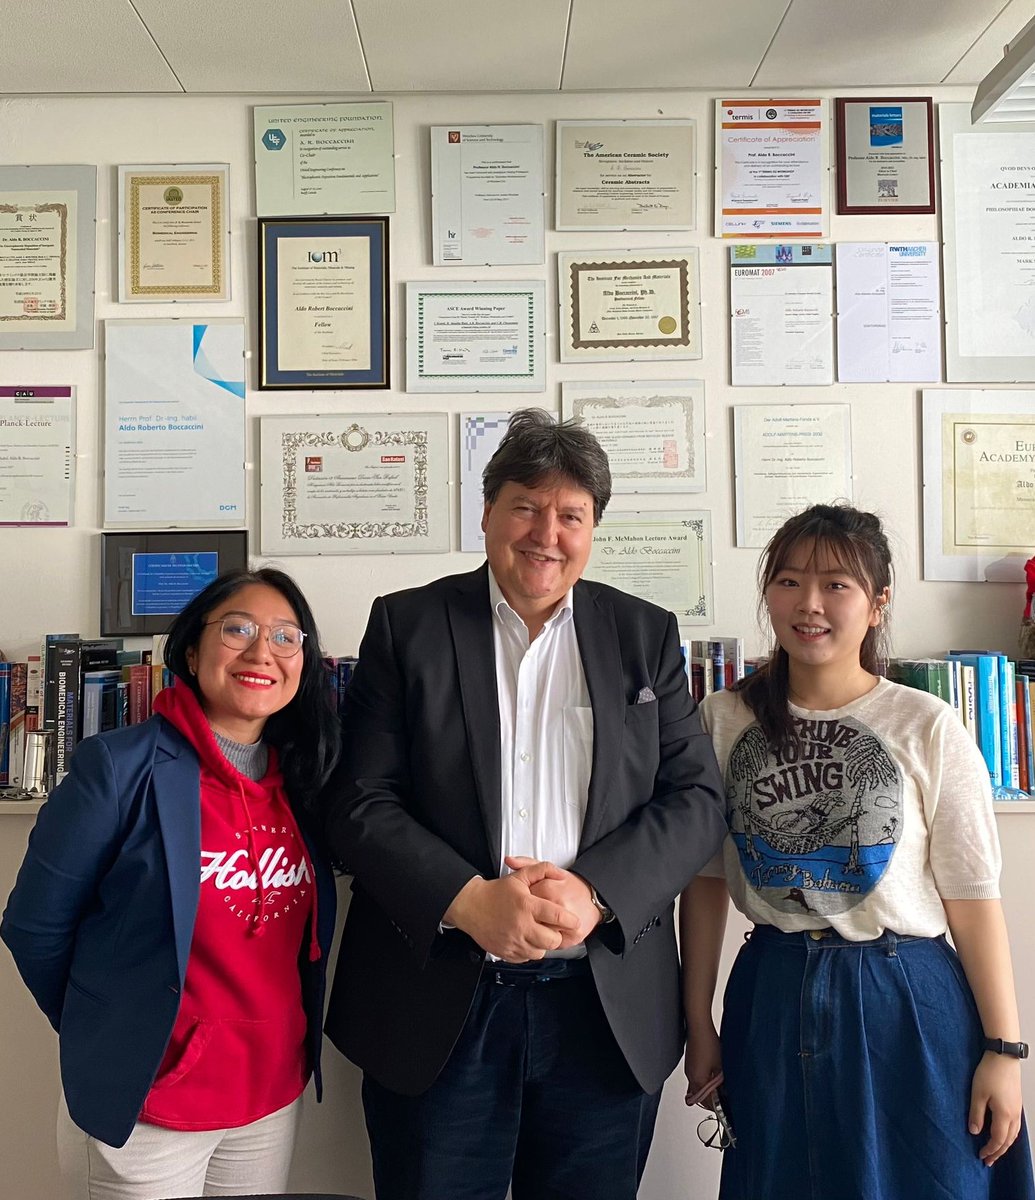 More visiting researchers @Boccaccini_Lab @UniFAU this spring! We welcome Guadalupe Ureiro Cueto from Nat. Autonomous Univ. Mexico @UNAM_MX🇲🇽 and Tongtong Leng from Xi' an Jiaotong Univ.🇨🇳Wishing you much success with your #biomaterials projects and a wonderful time in #Erlangen!